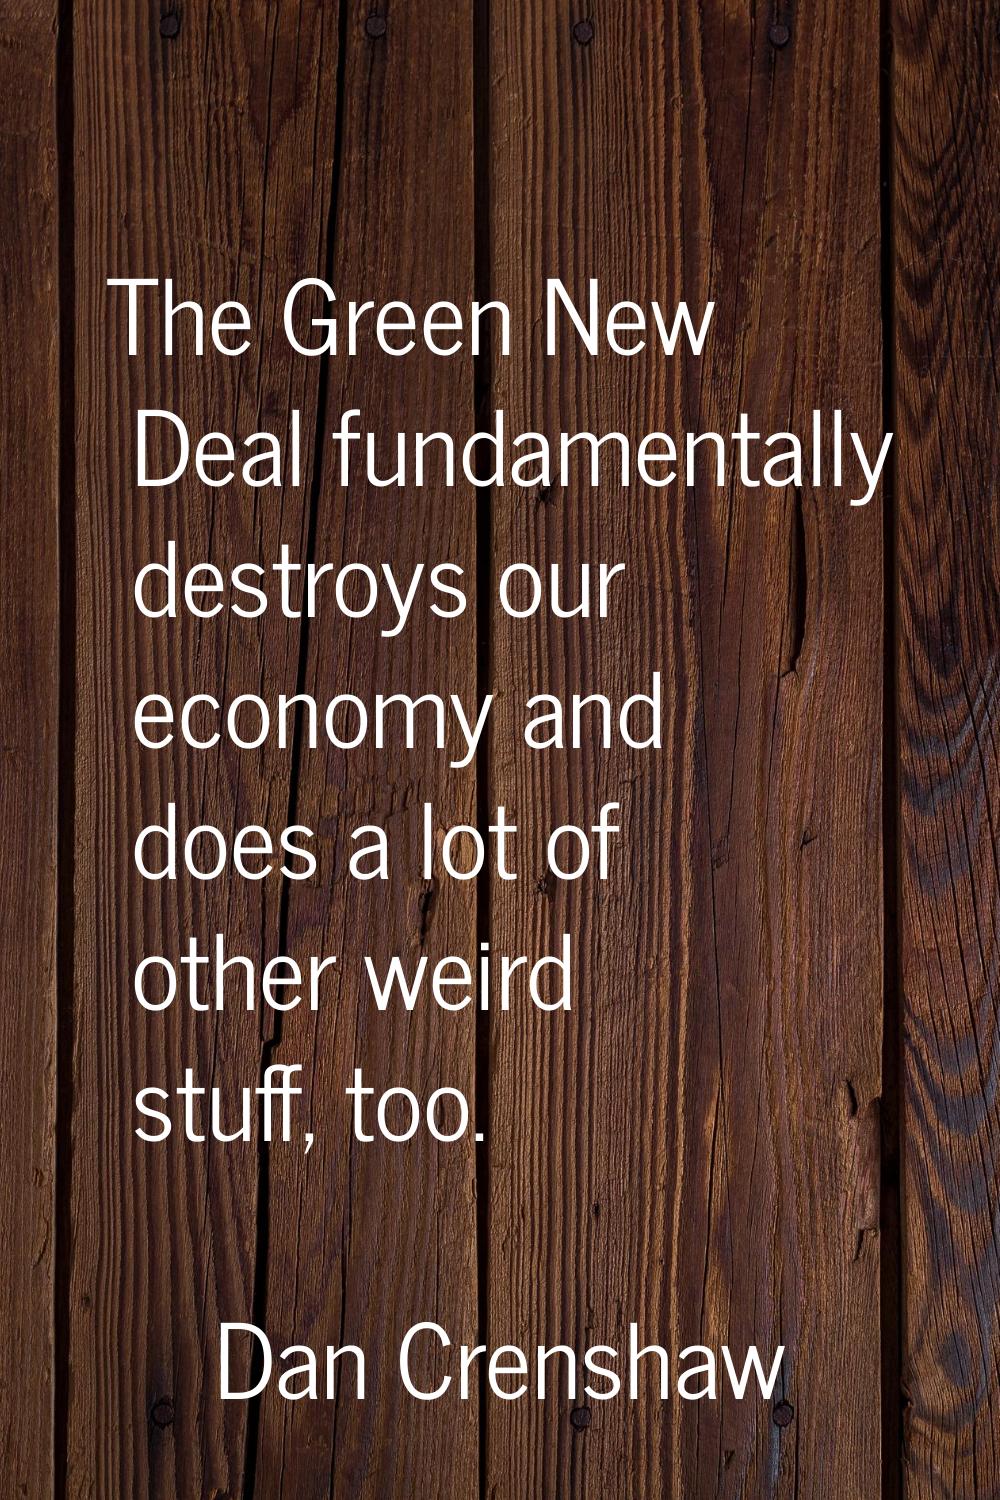 The Green New Deal fundamentally destroys our economy and does a lot of other weird stuff, too.